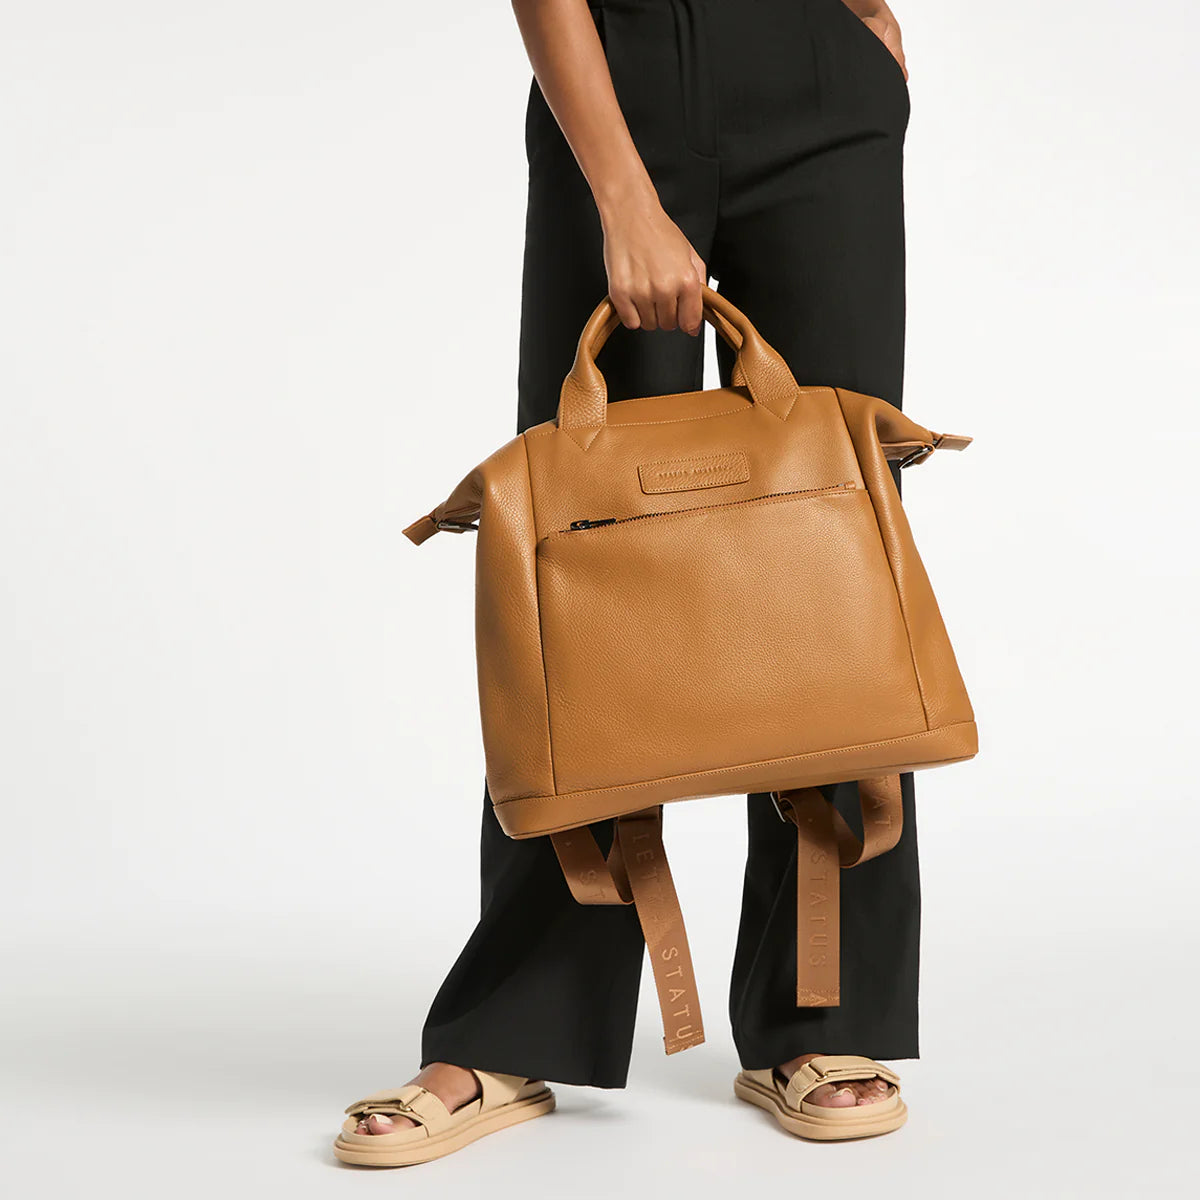 Status Anxiety - Comes in Waves Backpack / Baby Bag - Tan